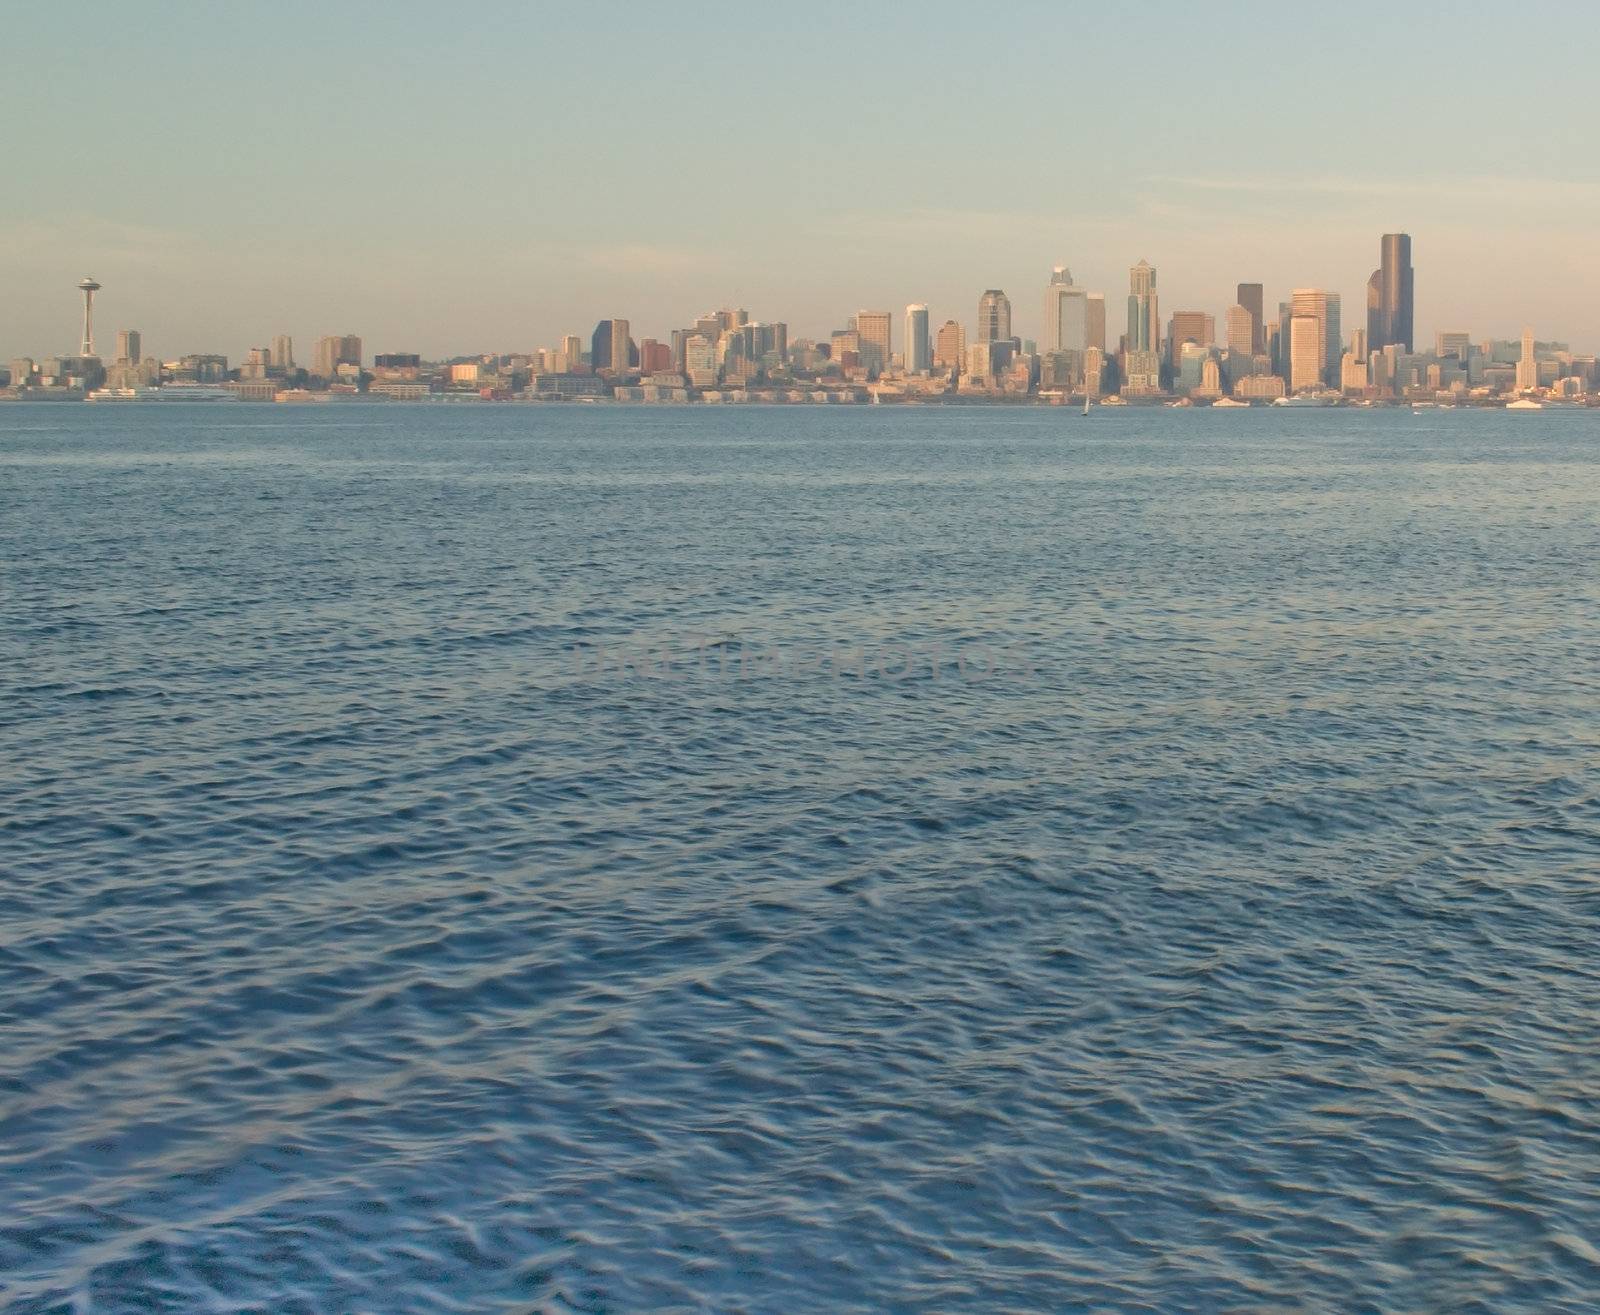 Seattle Skyline with Space Needle and Ferry as it crosses the waters of the Puget Sound as viewed from Alki.